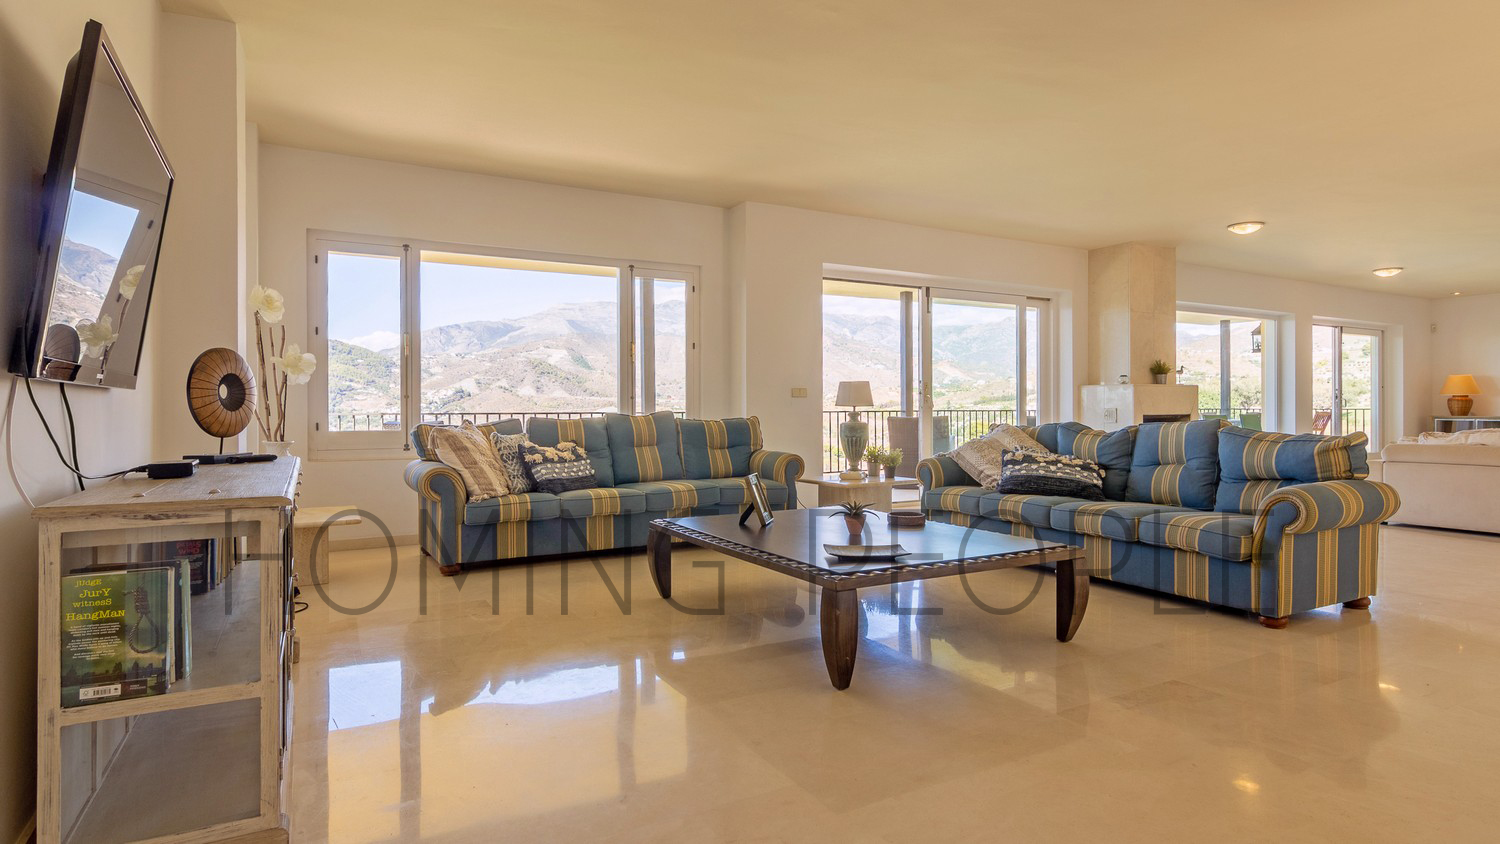 A true feeling of interior space within a privileged setting offering the best views of the bay.